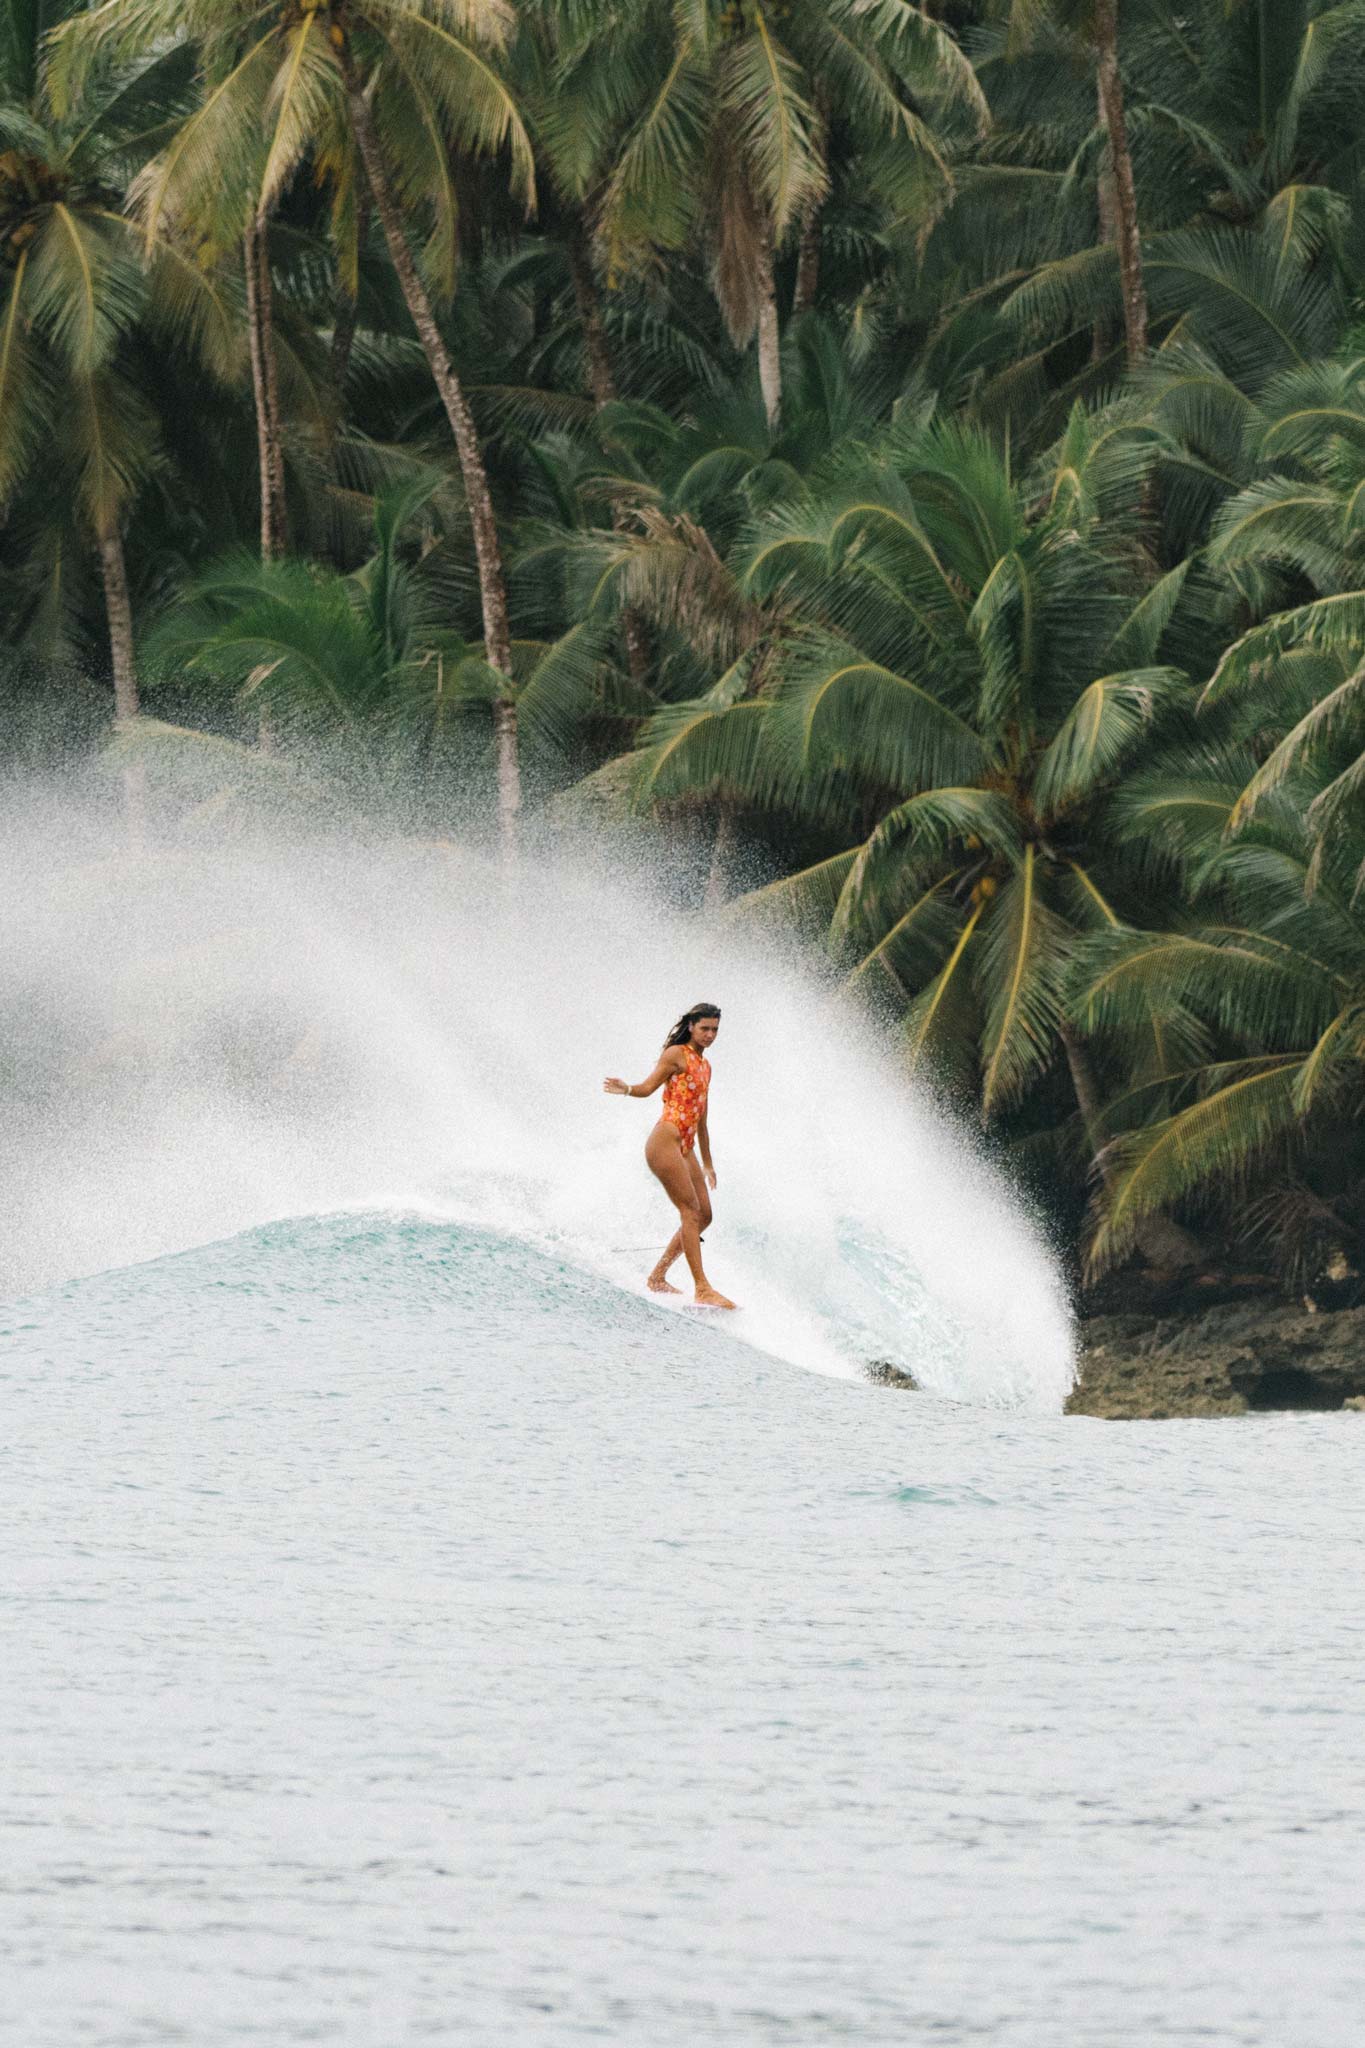 model surfing with a wave spraying behind her and palmtrees in the background